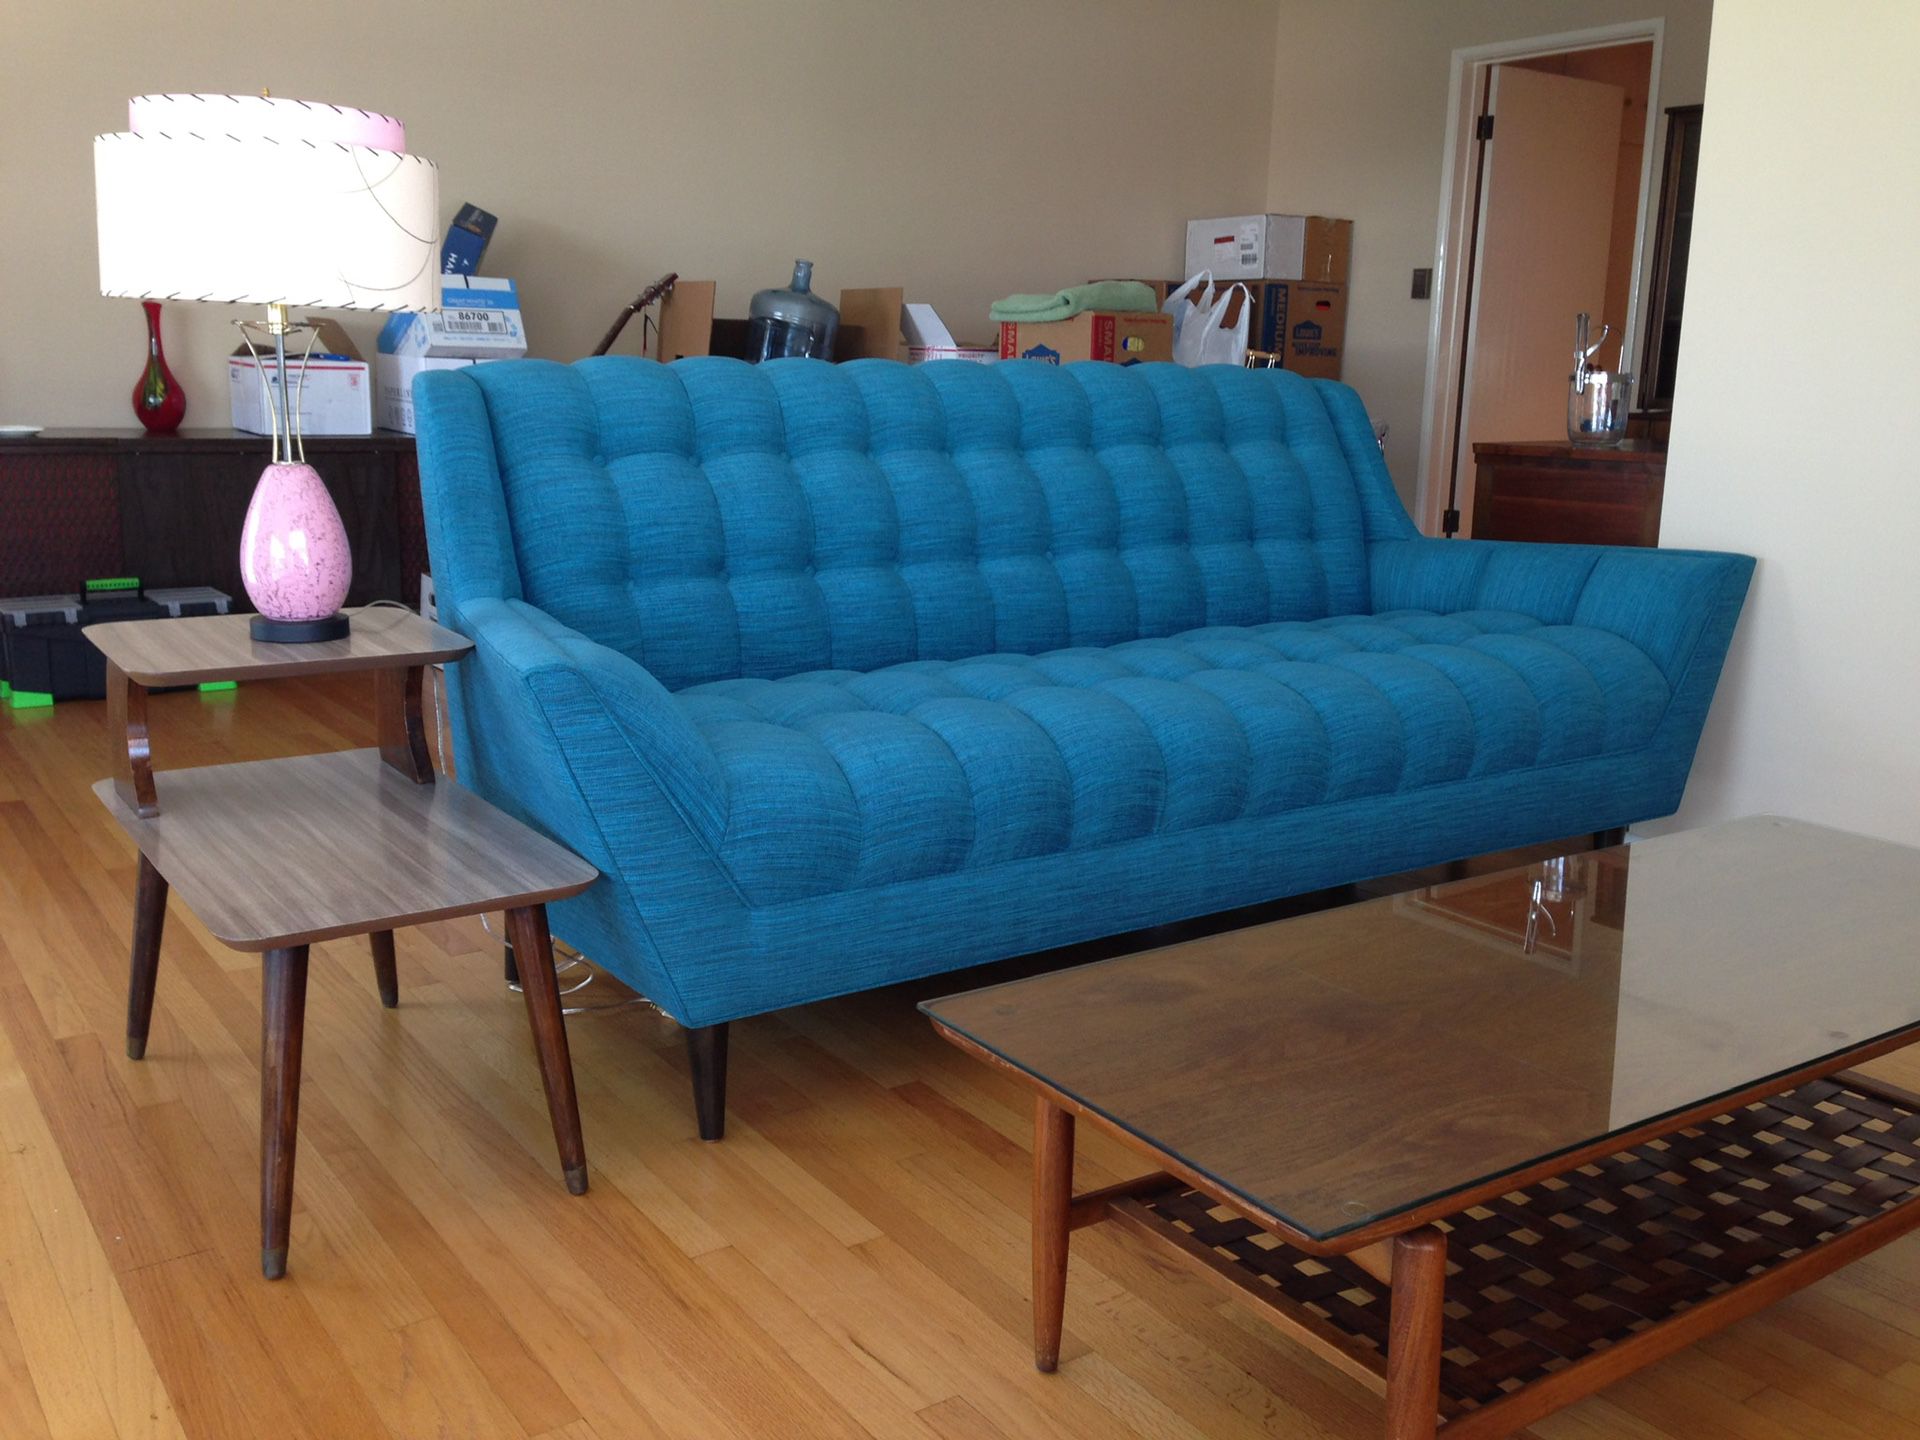 New Discontinued Thrive Modern/Mid-century Couch and Chair